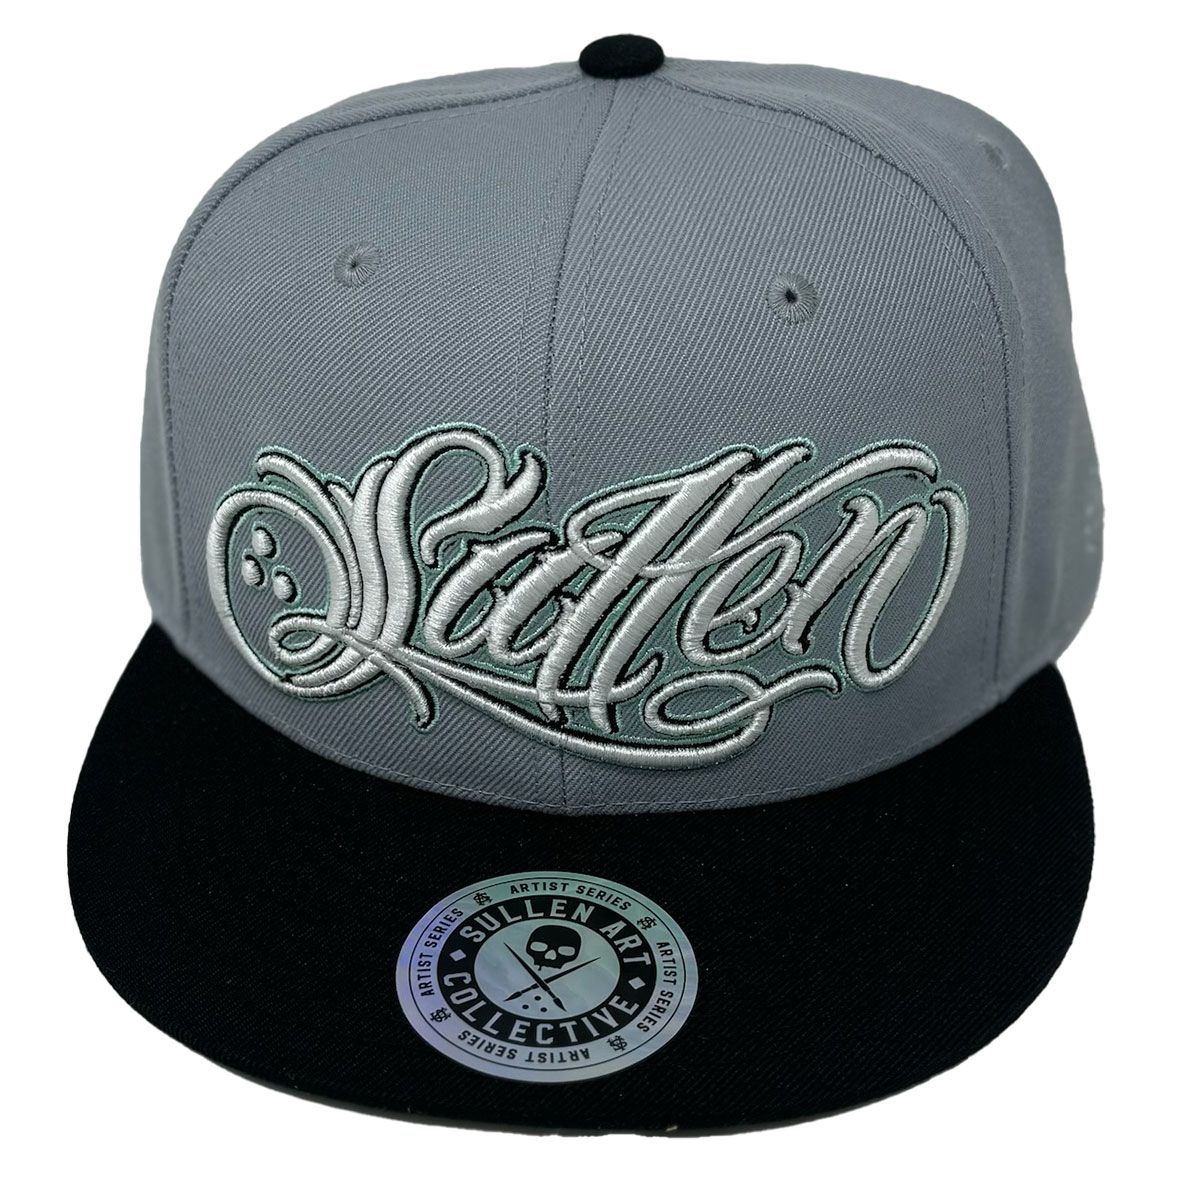 SULLEN ART COLLECTIVE BUTTERY SNAPBACK